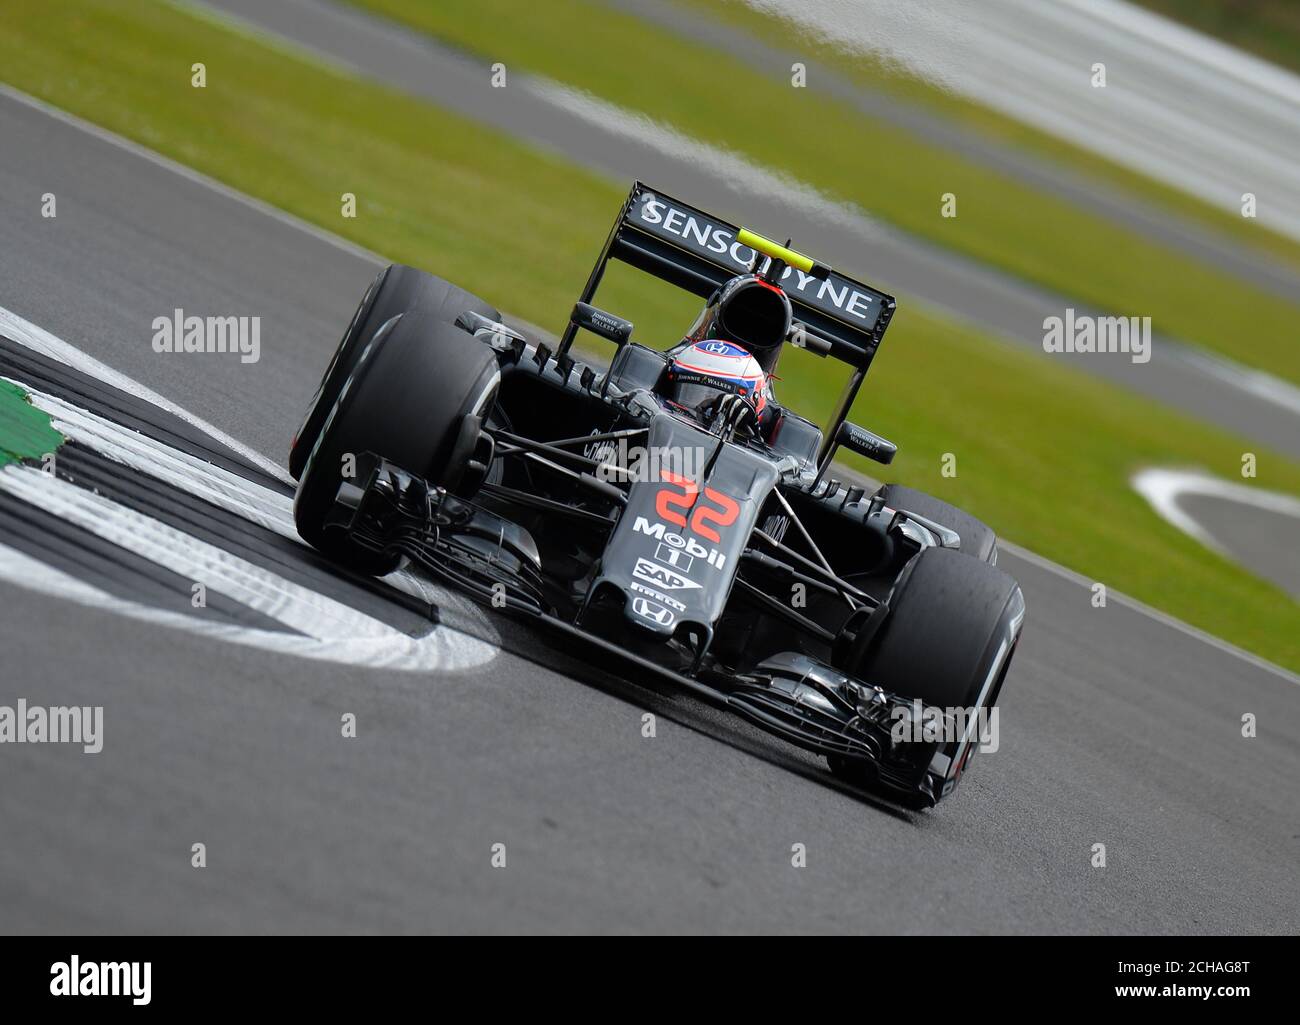 McLaren's Jenson Button during Practice Day for the 2016 British Grand Prix at Silverstone Circuit, Towcester. PRESS ASSOCIATION Photo. Picture date: Friday July 8, 2016. See PA story AUTO British. Photo credit should read: Tony Marshall/PA Wire. RESTRICTIONS: Editorial use only. Commercial use with prior consent from teams. Call +44 (0)1158 447447 for further information. Stock Photo